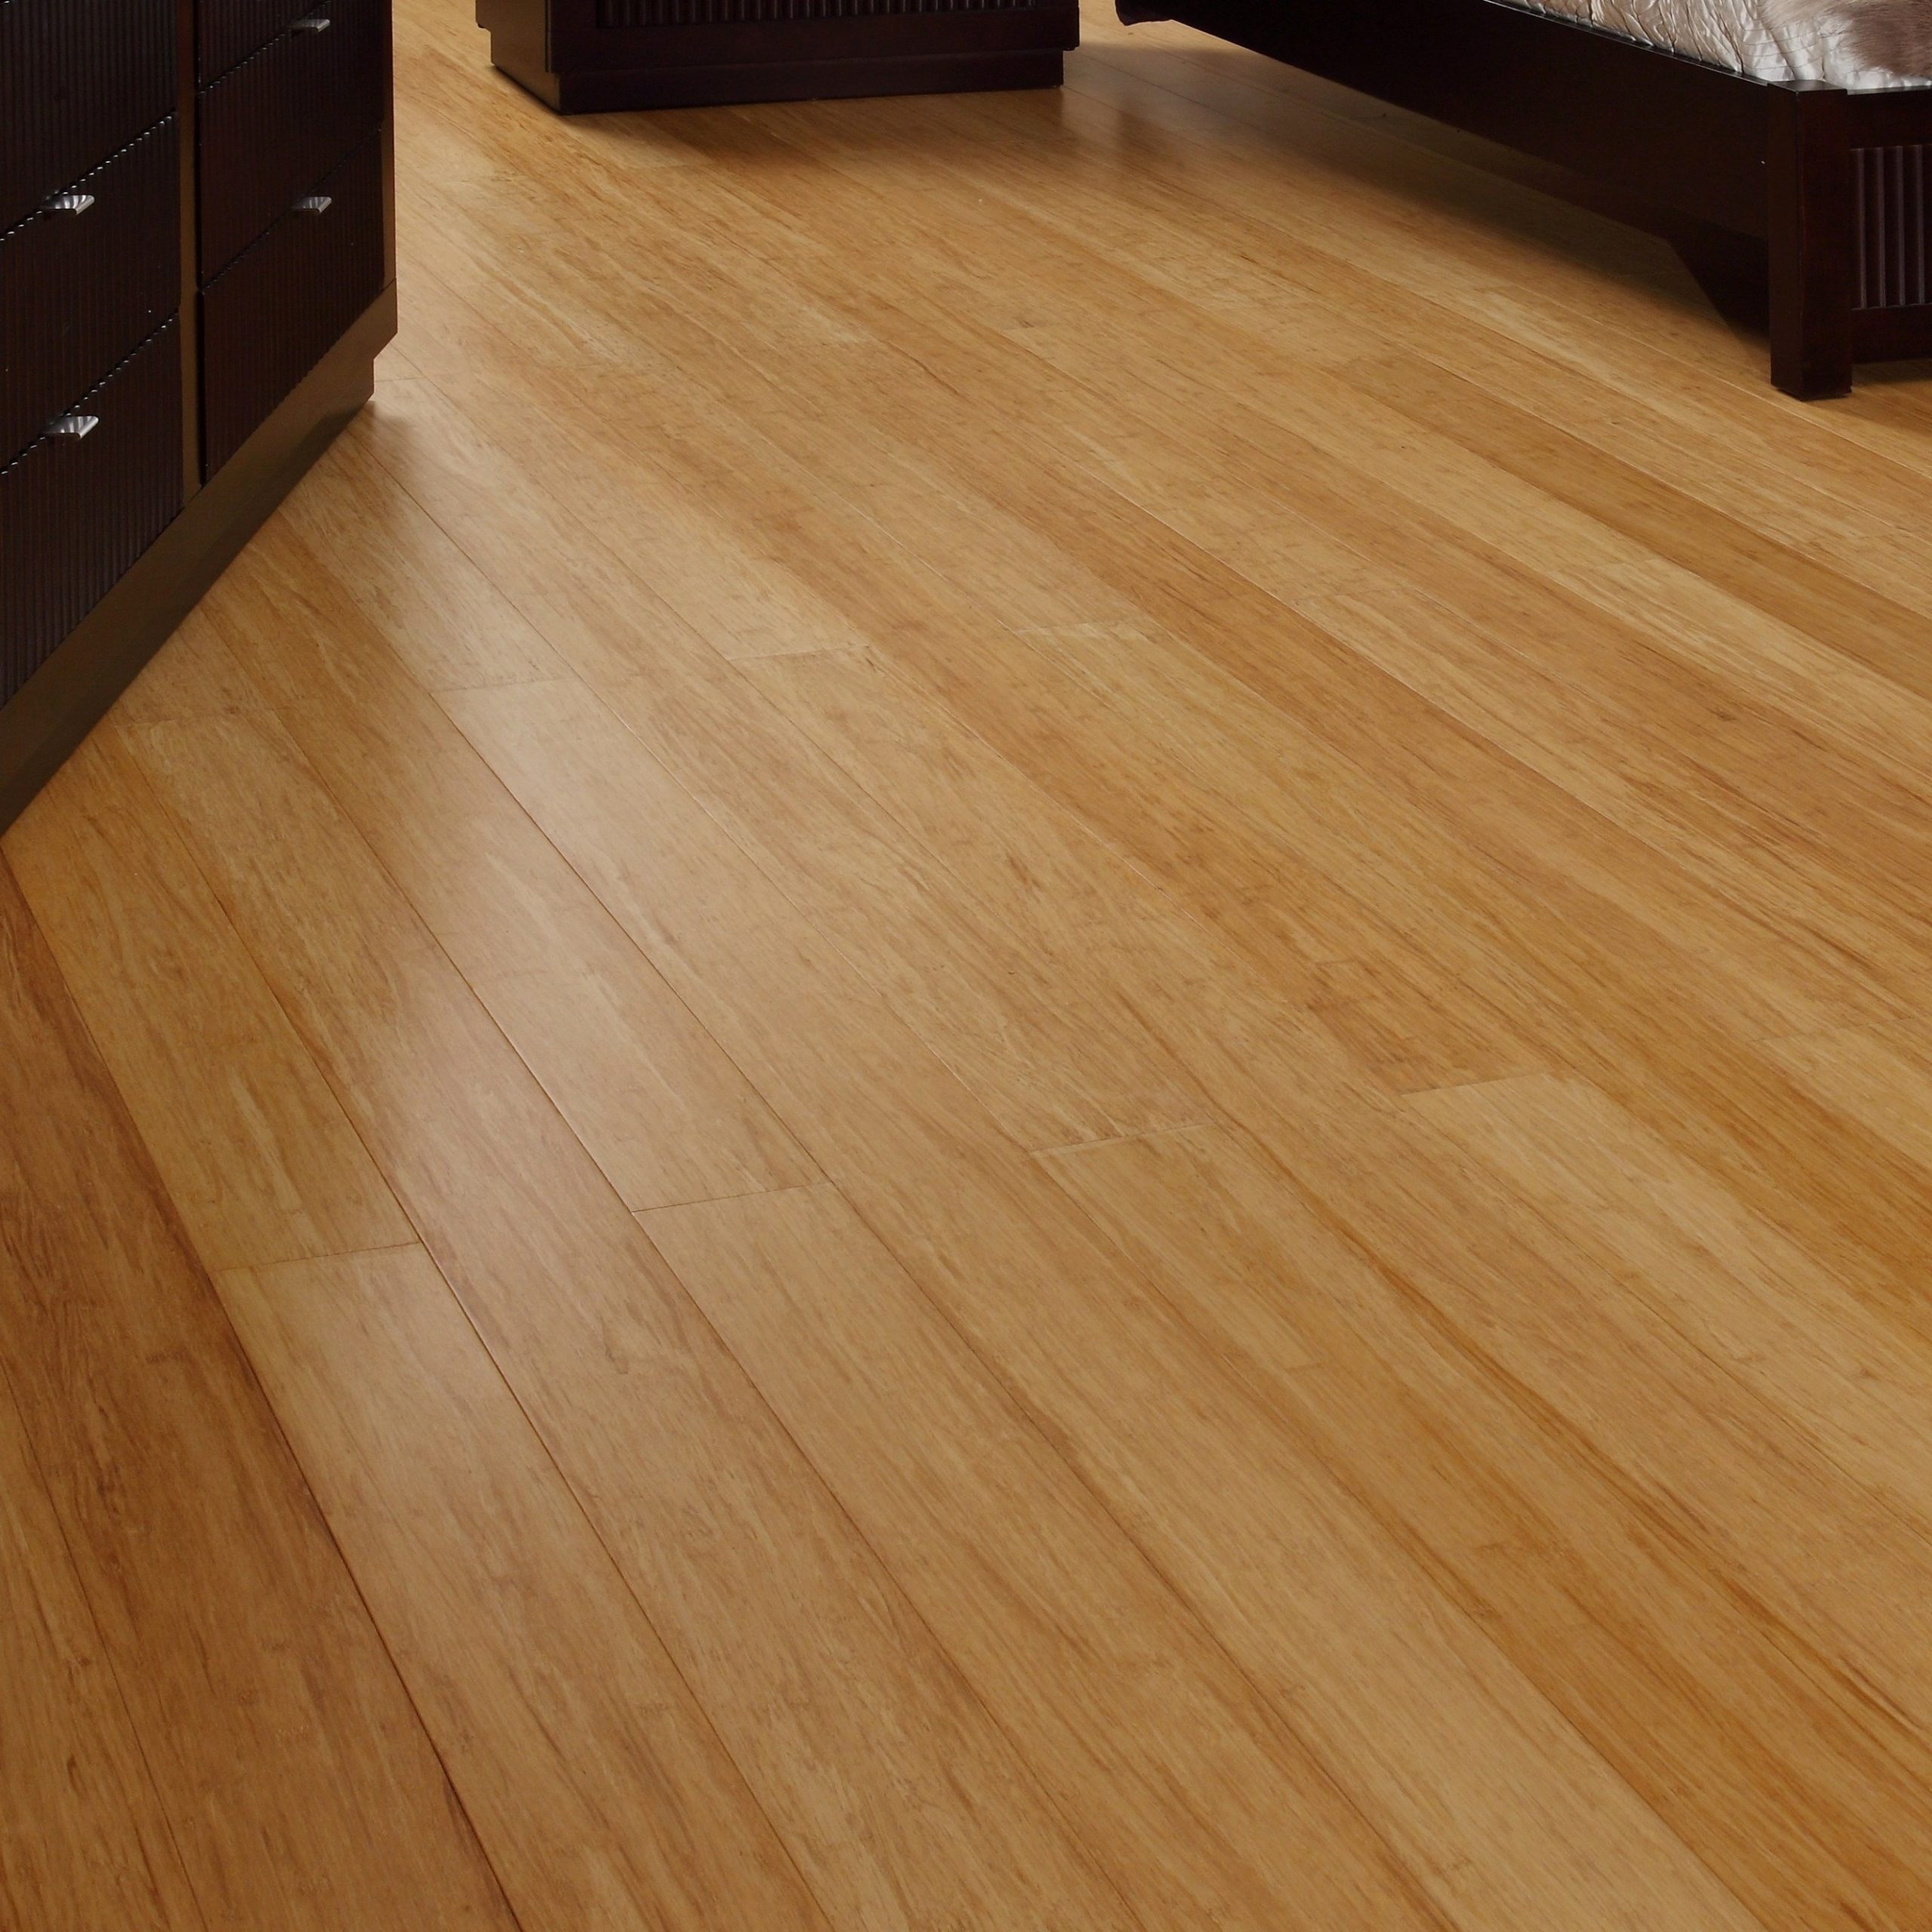 Can Morningstar Stranded Bamboo Flooring Be Refinished